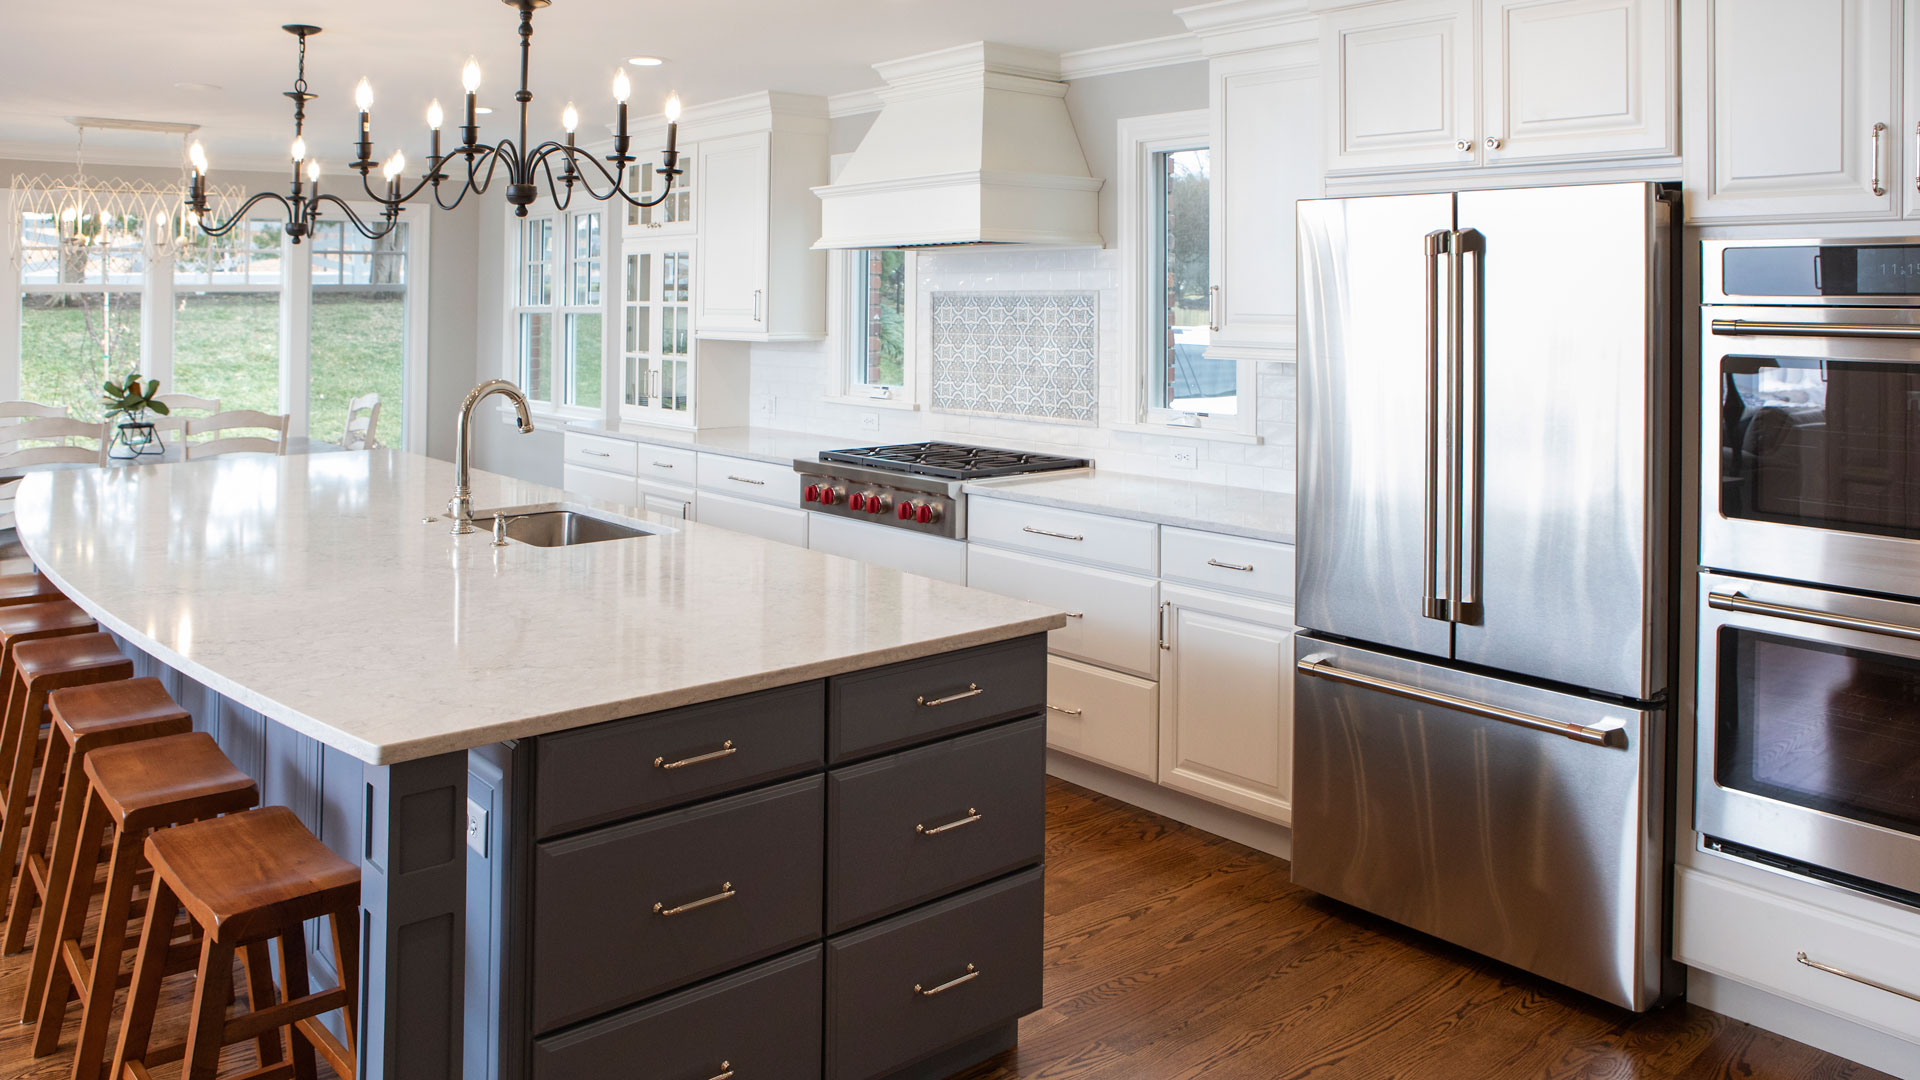 From Concept to Completion: Your Home Remodeling